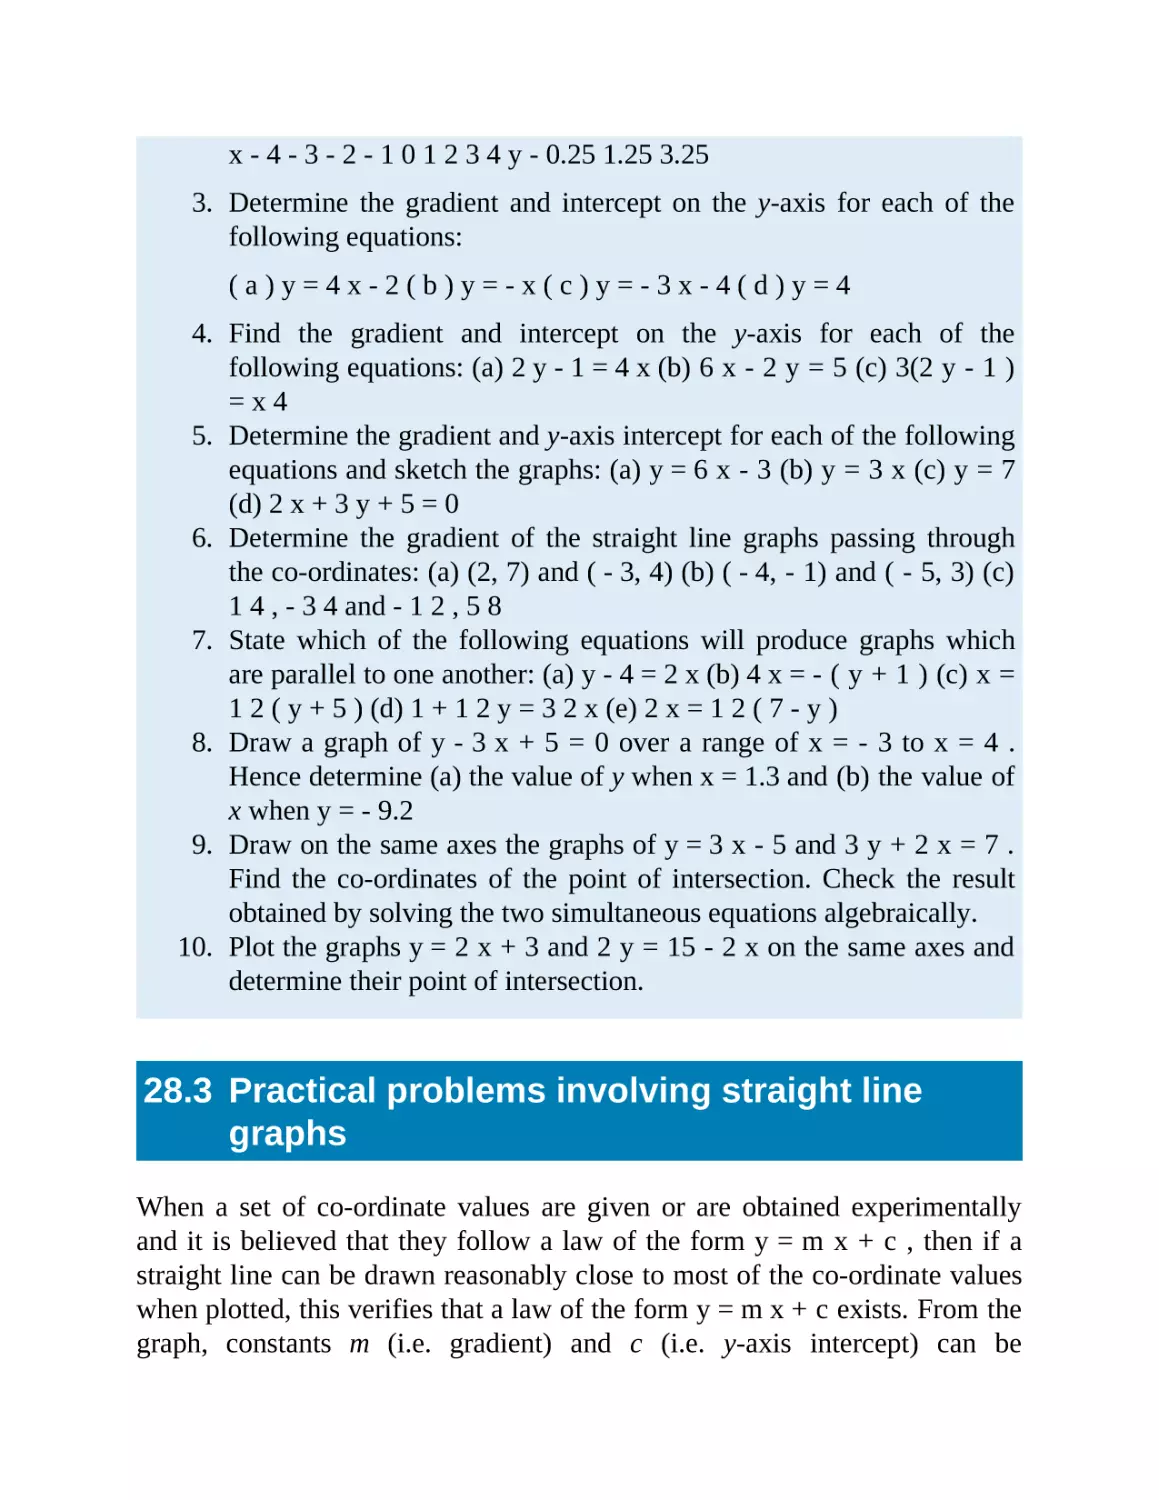 28.3 Practical problems involving straight line graphs